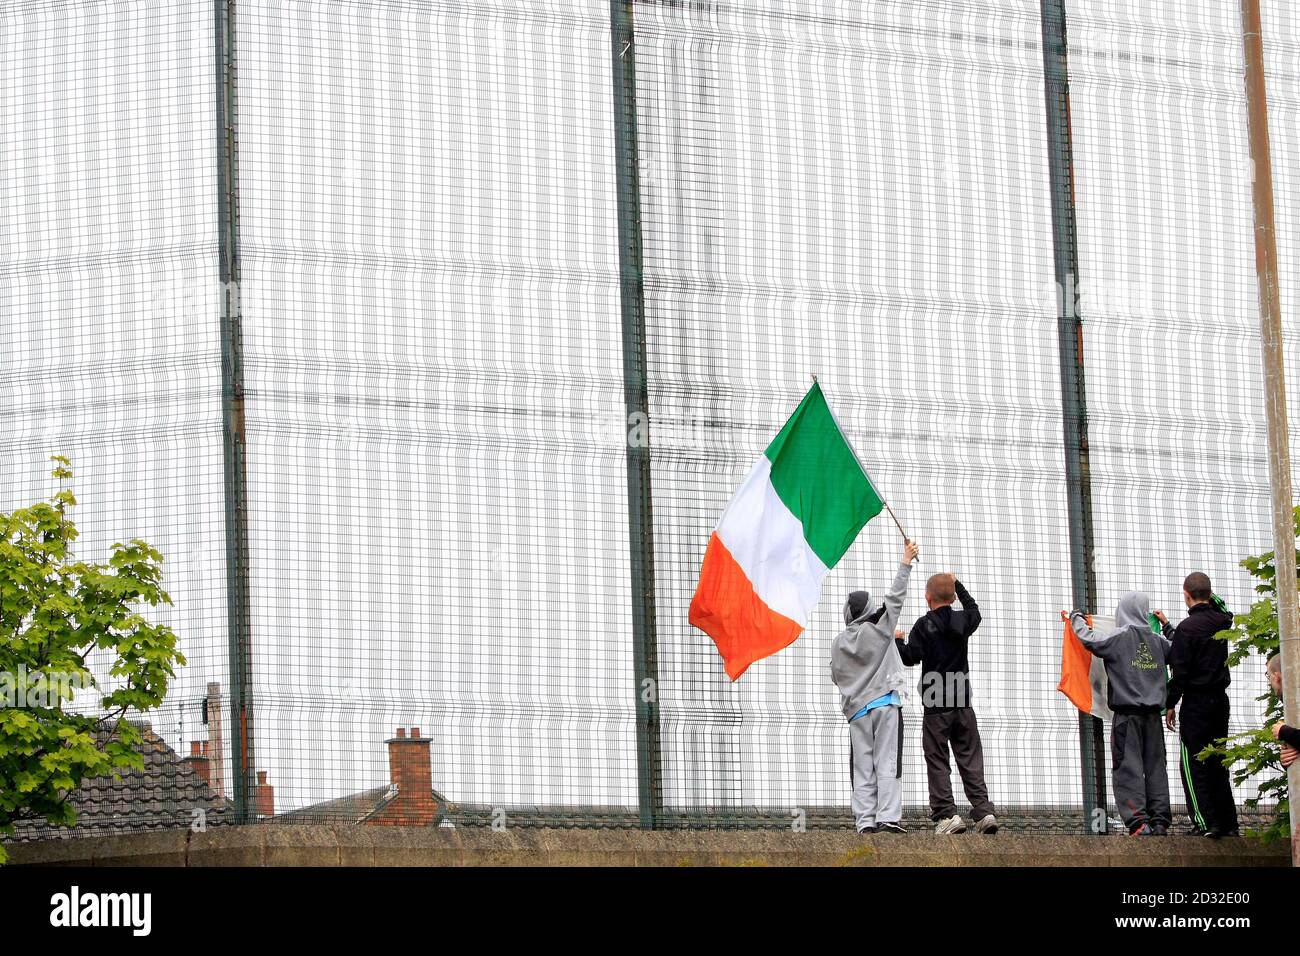 Nationalist youths taunt Loyalists on the opposite side of the peace line as an Orange Parade passed from the Loyalist Shankill Road area of West Belfast through the Nationalist Springfield Road in Belfast June 27, 2009. REUTERS/Cathal McNaughton (NORTHERN IRELAND CONFLICT POLITICS IMAGES OF THE DAY) Stock Photo